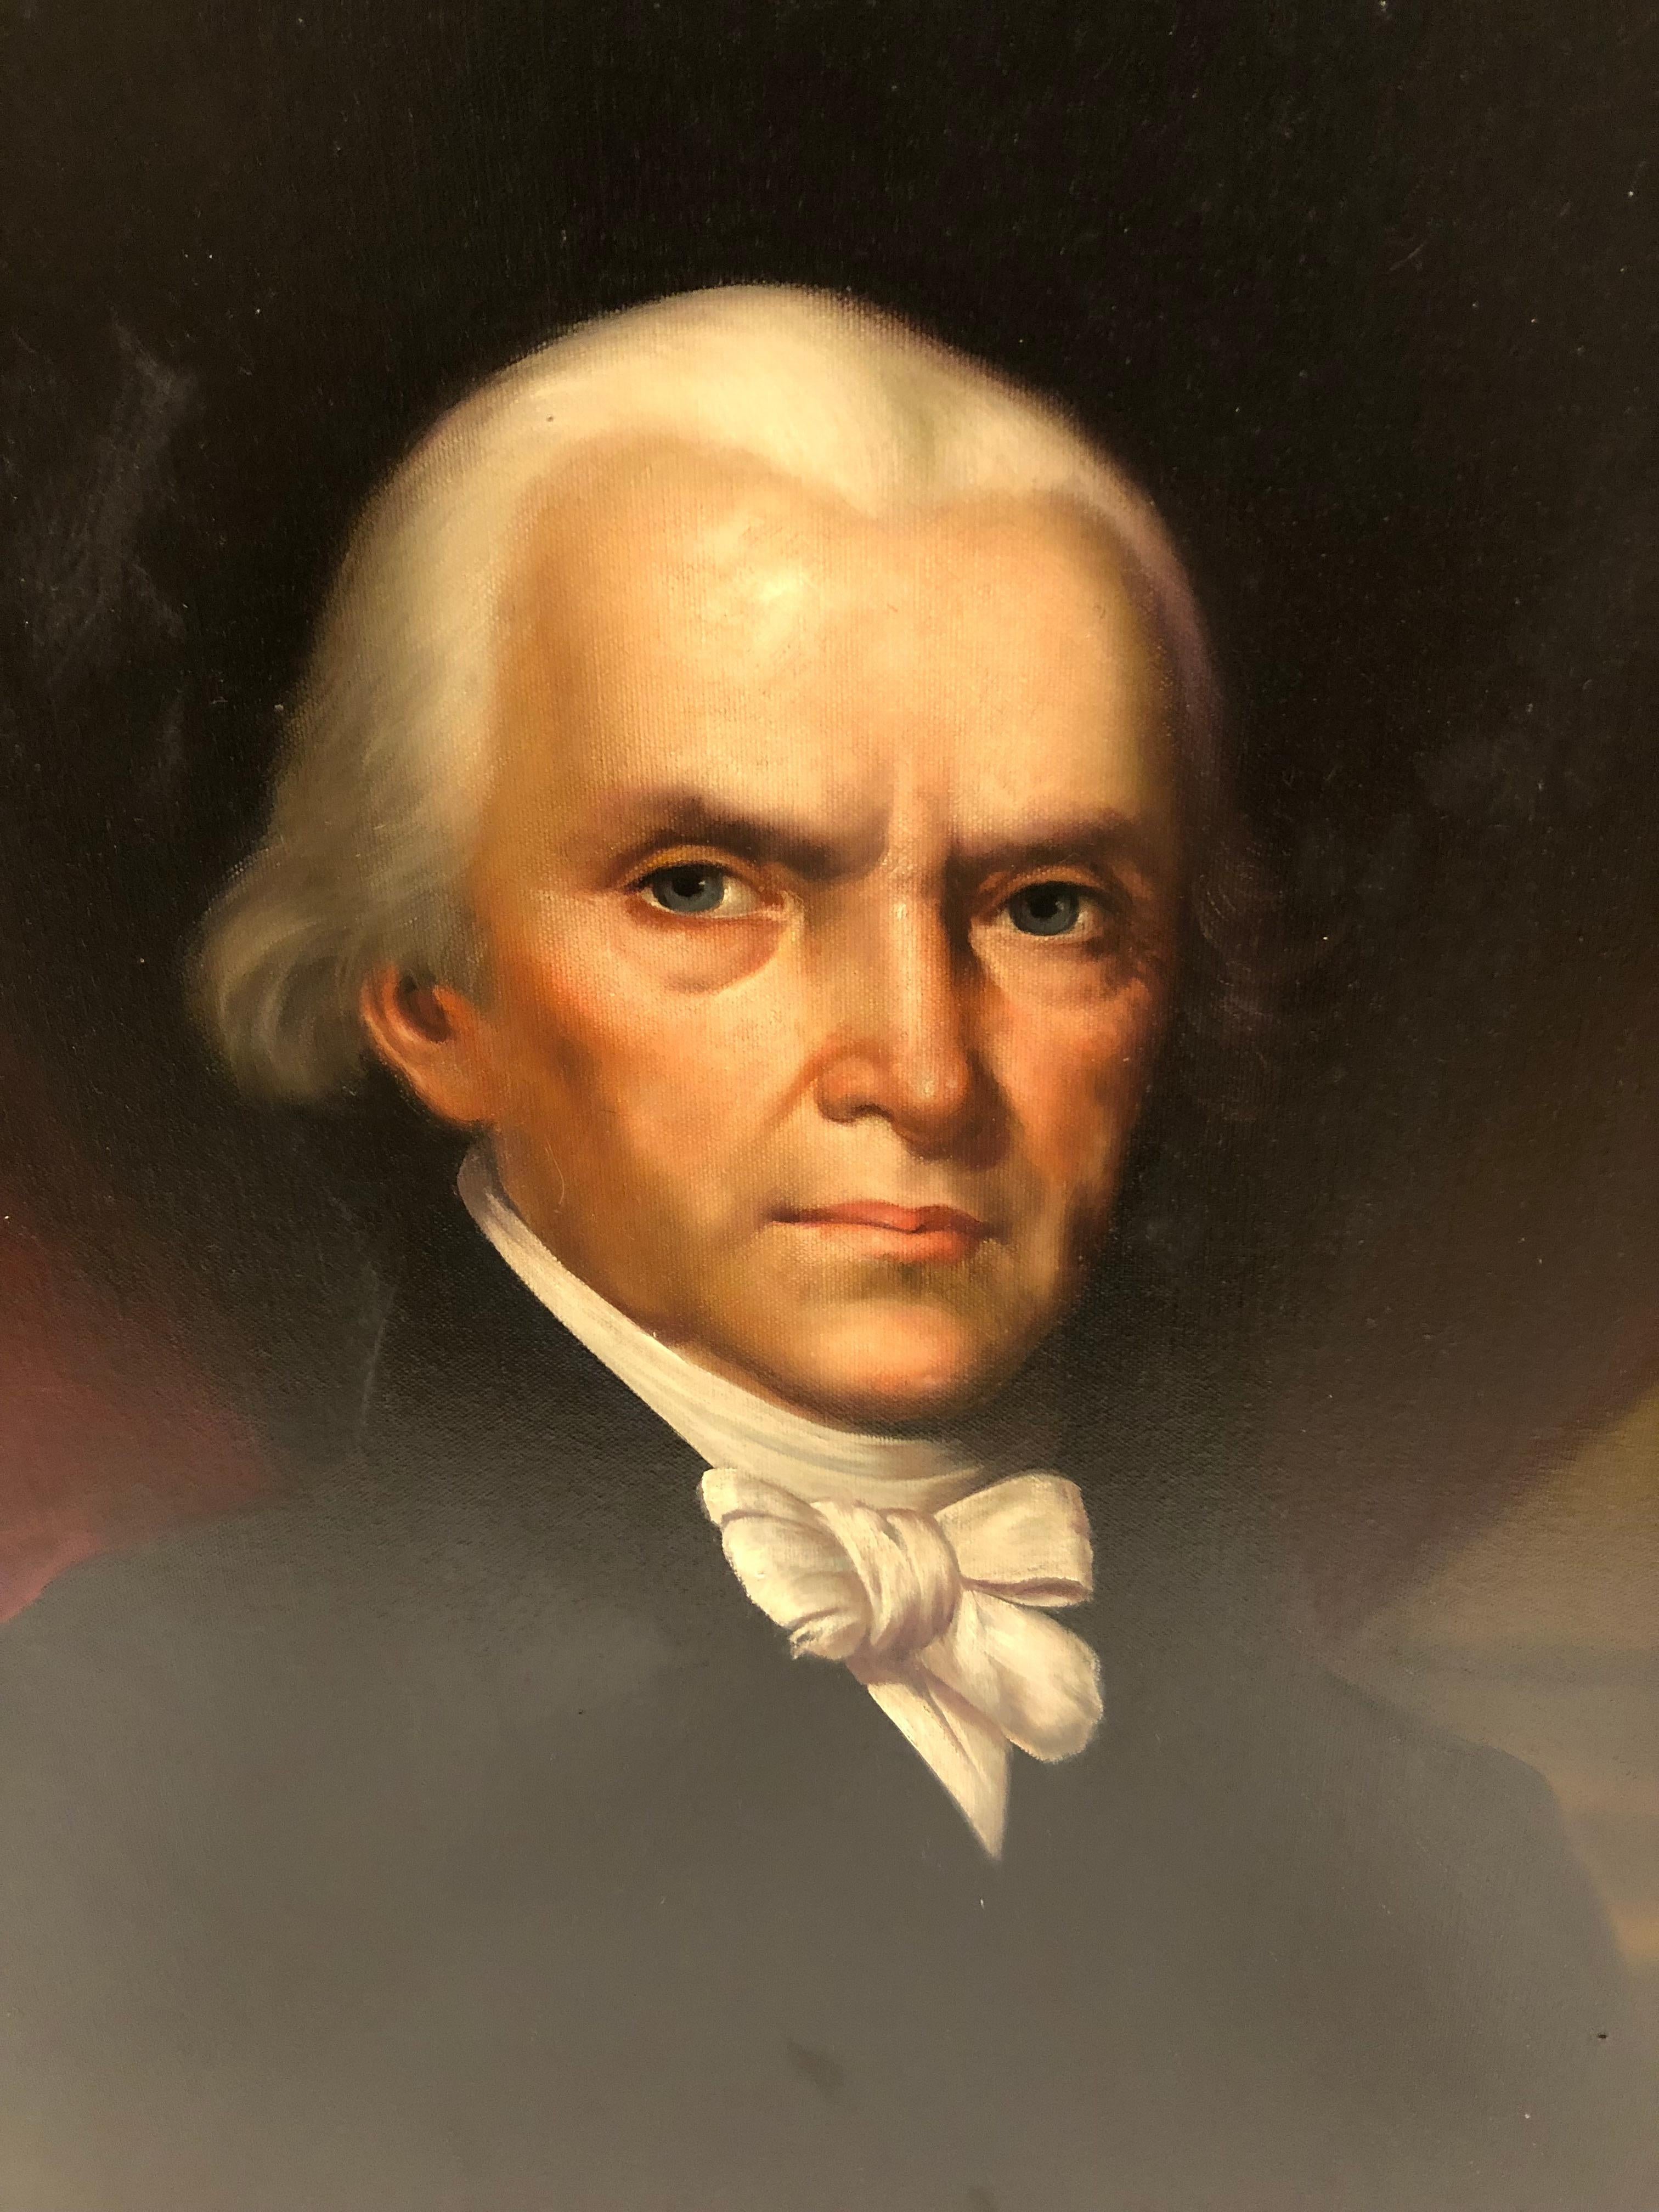 An impressive painting of President James Madison that's a reproduction of an original antique portrait painted by John Vanderlyn in 1816. Gorgeous black and gold chunky frame with fleur di lis decoration in each corner.
Signed Henry Callan
Canvas